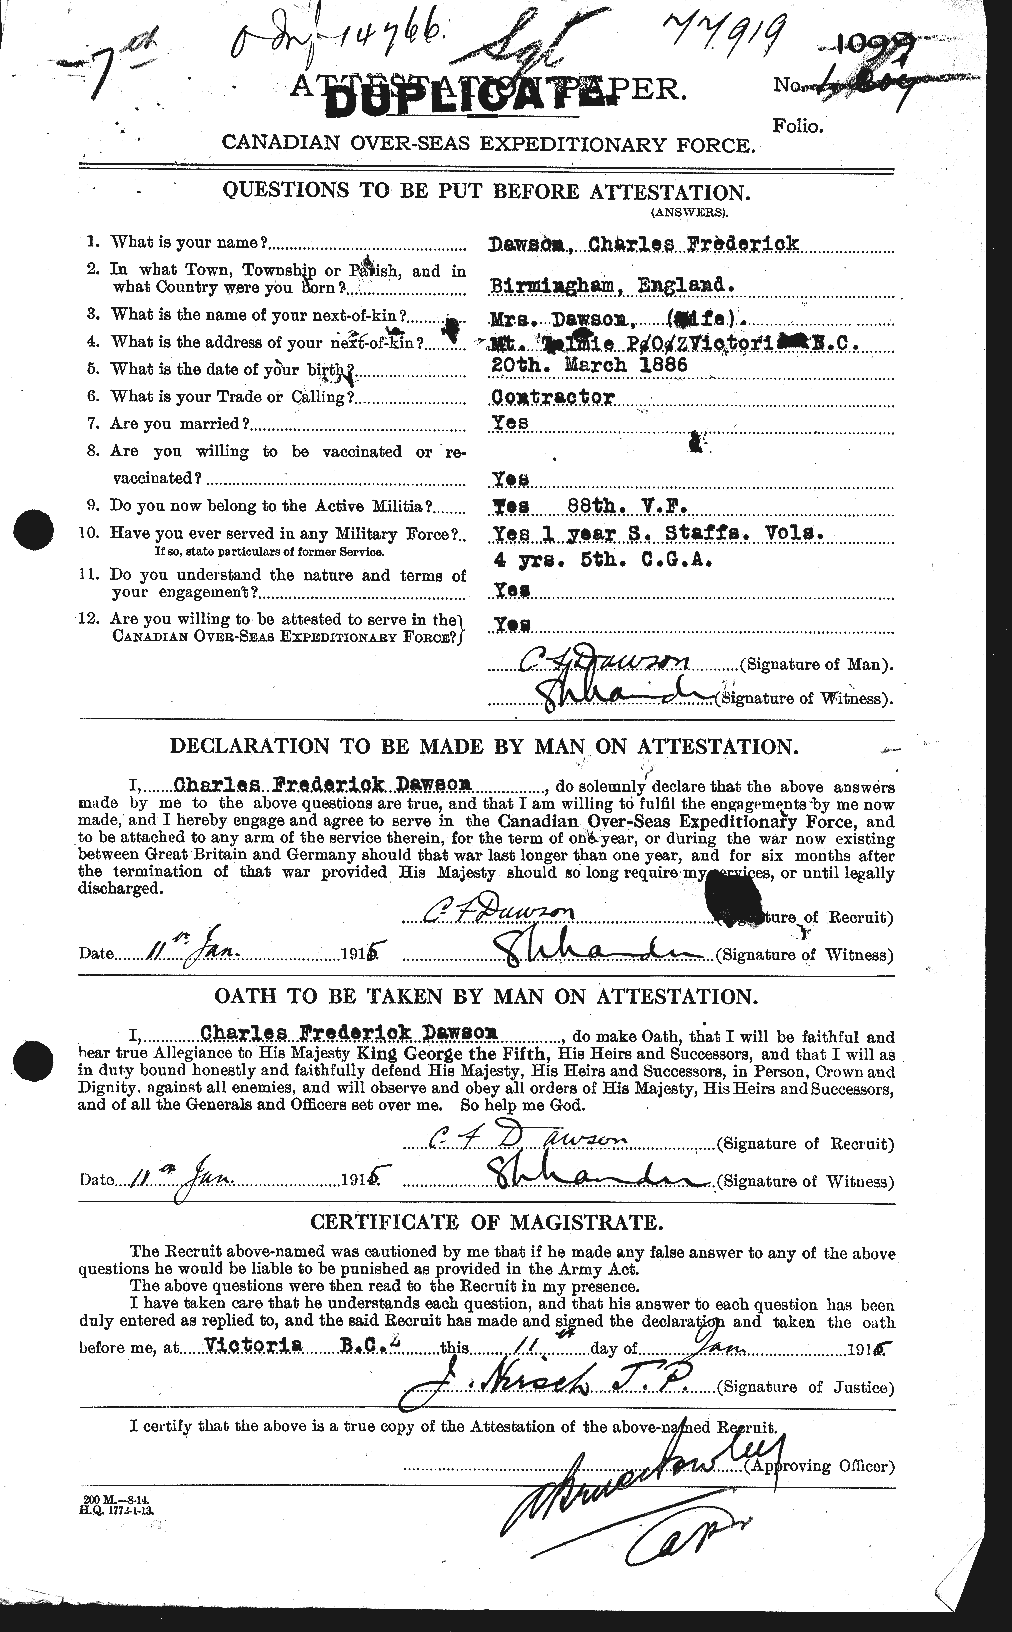 Personnel Records of the First World War - CEF 285086a